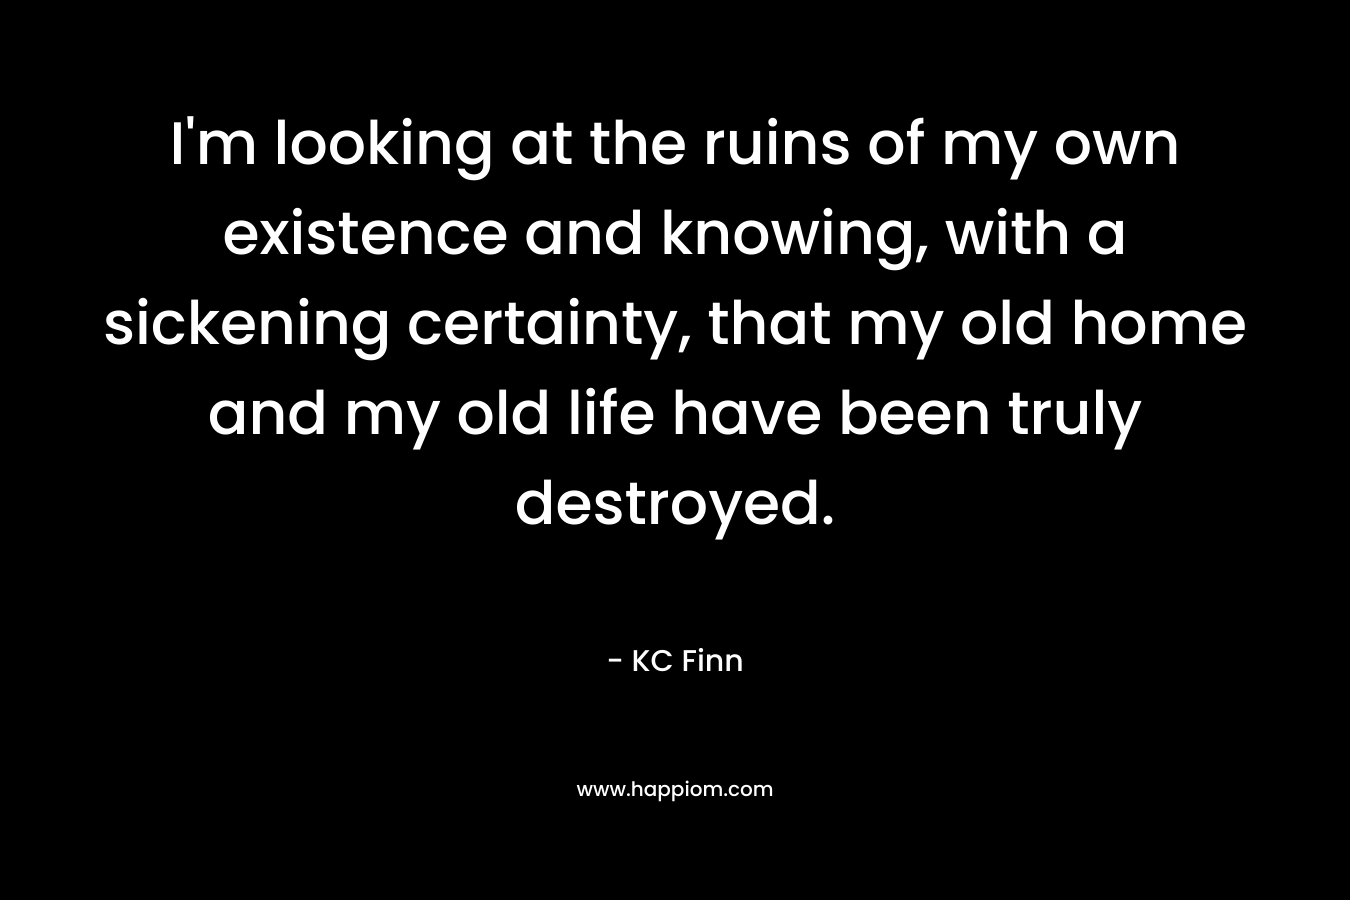 I’m looking at the ruins of my own existence and knowing, with a sickening certainty, that my old home and my old life have been truly destroyed. – KC Finn